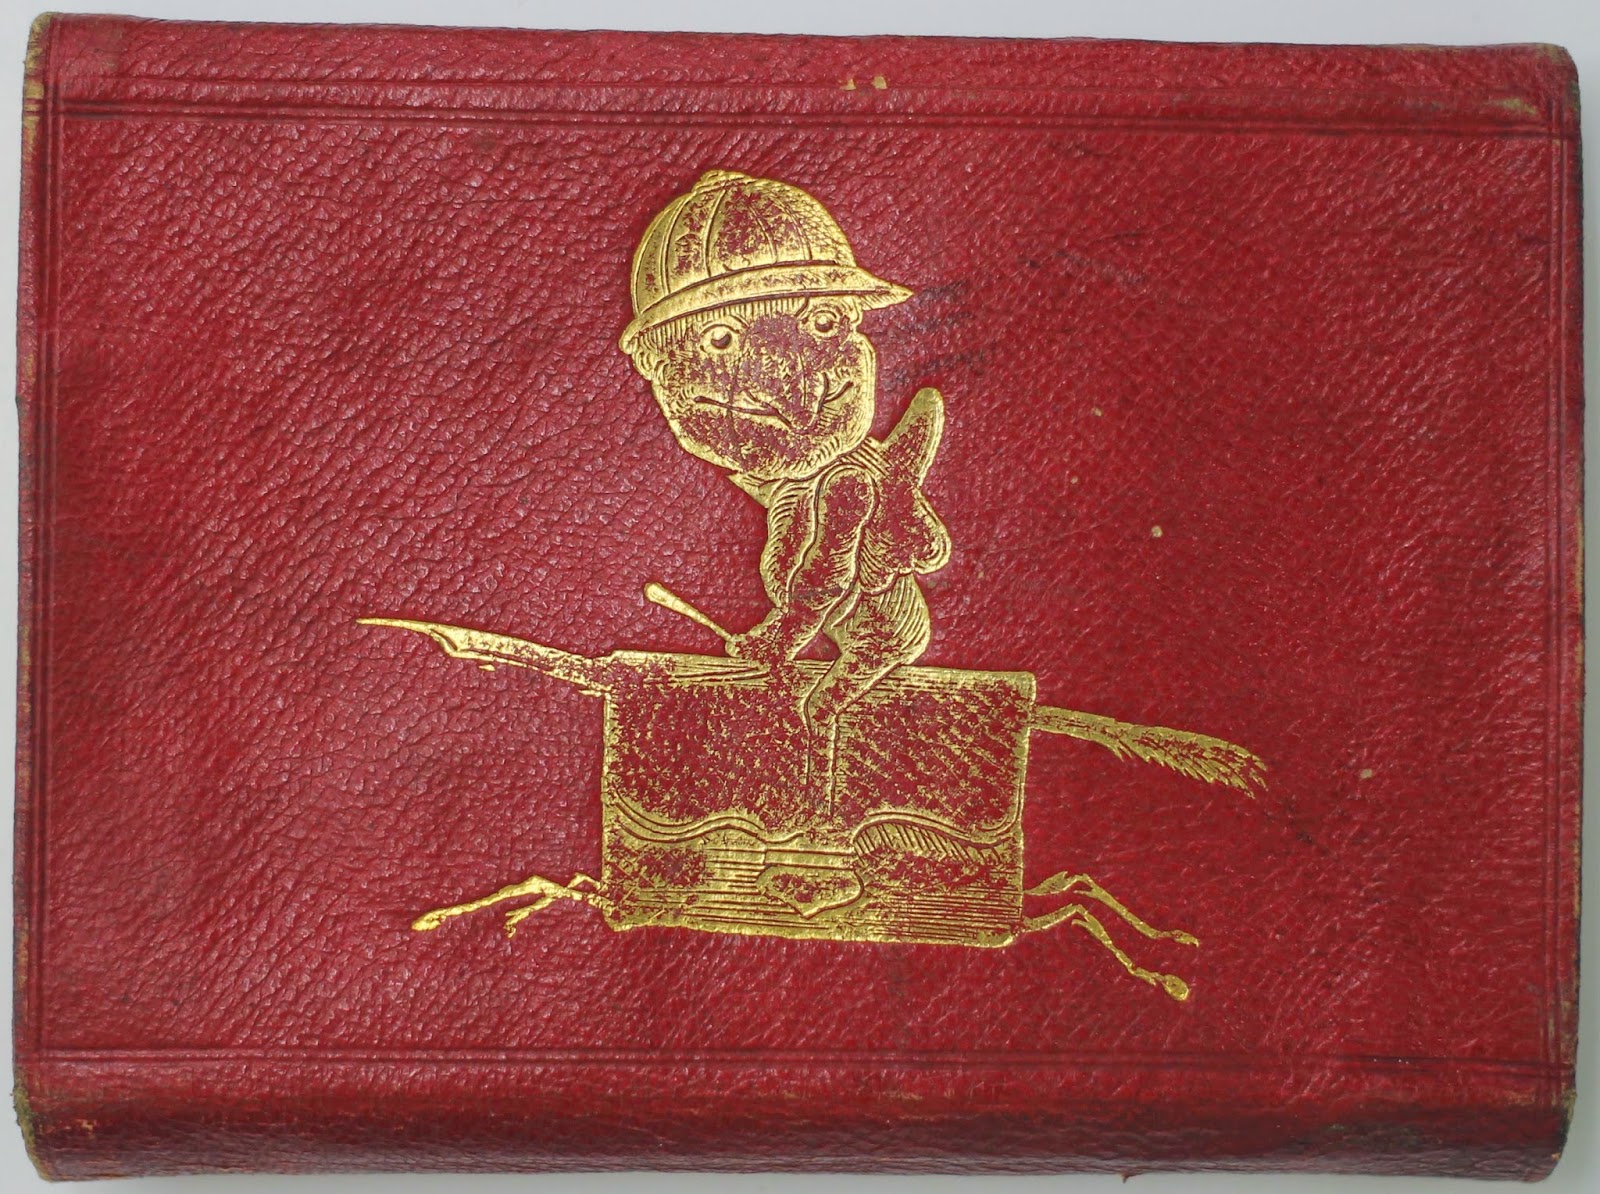 A red leather book-case with a yellow cartoon of a figure sitting on a leather-bound notebook with legs